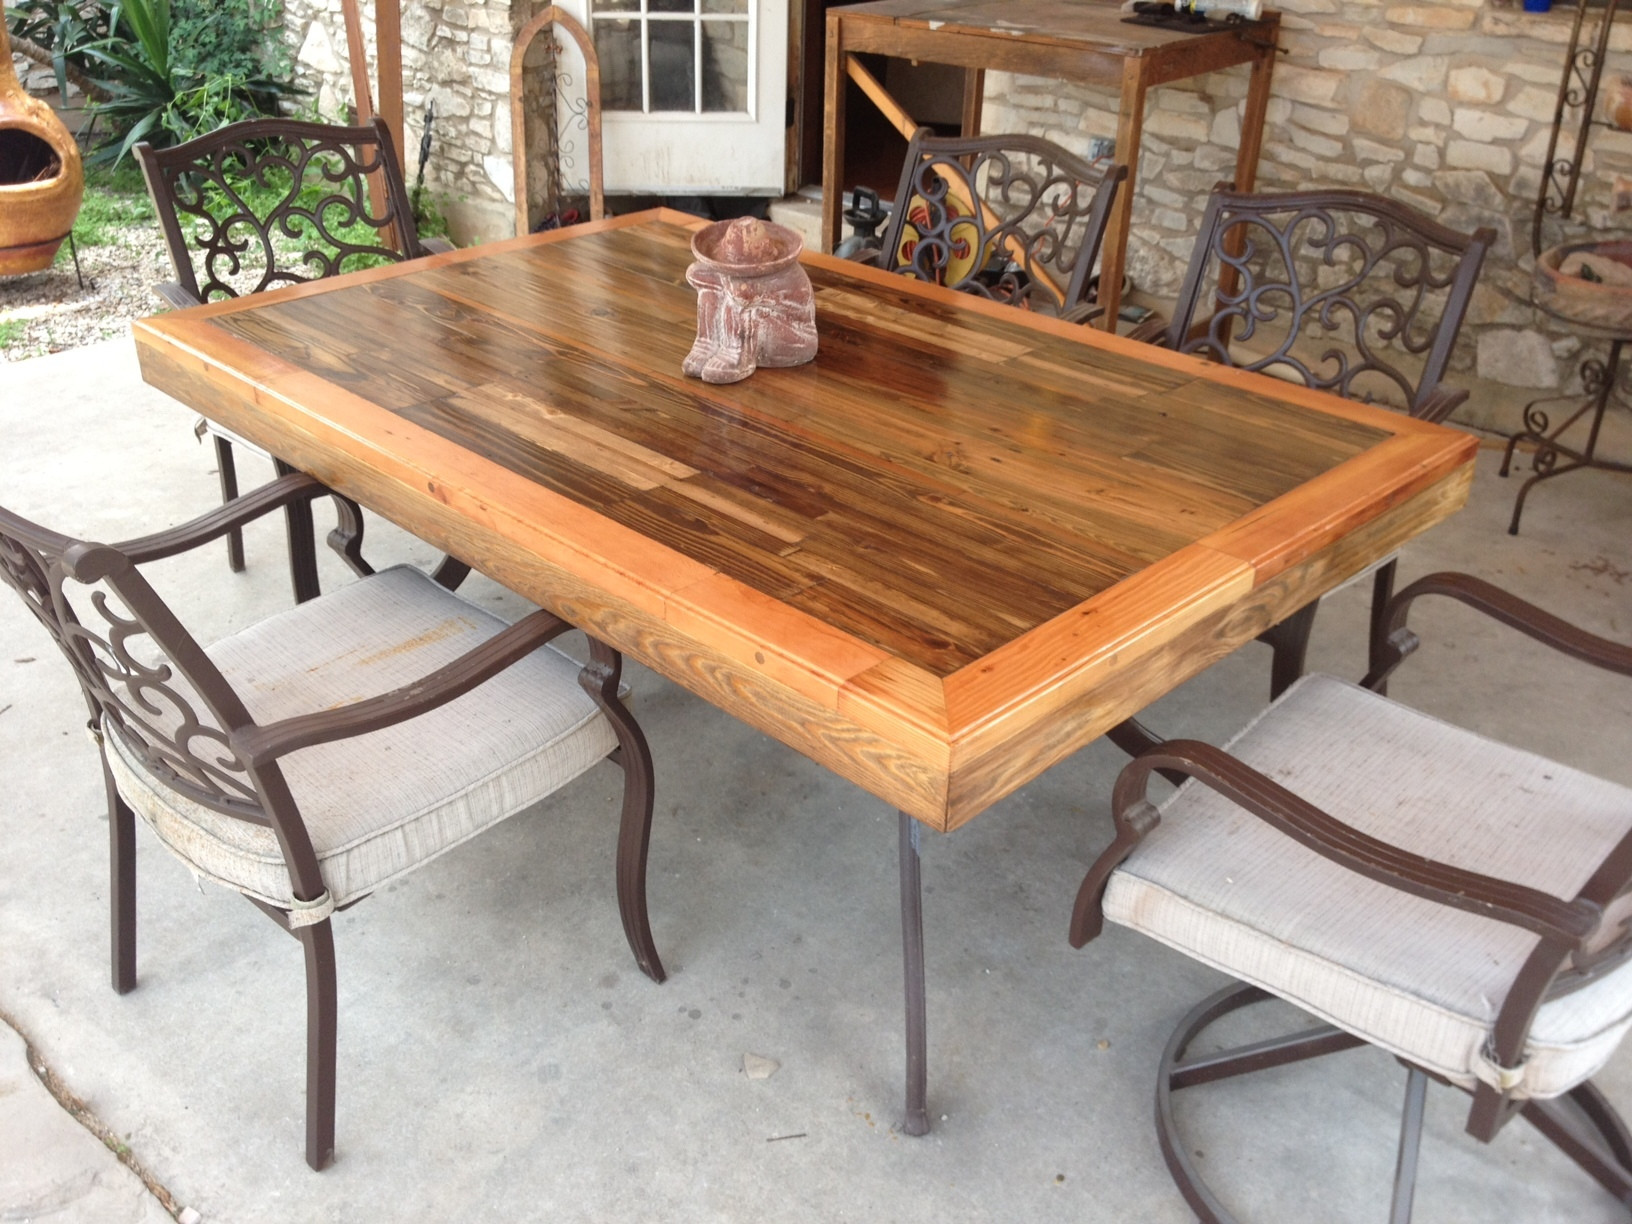 DIY Wooden Patio Table
 Patio Tabletop Made From Reclaimed Deck Wood 4 Steps